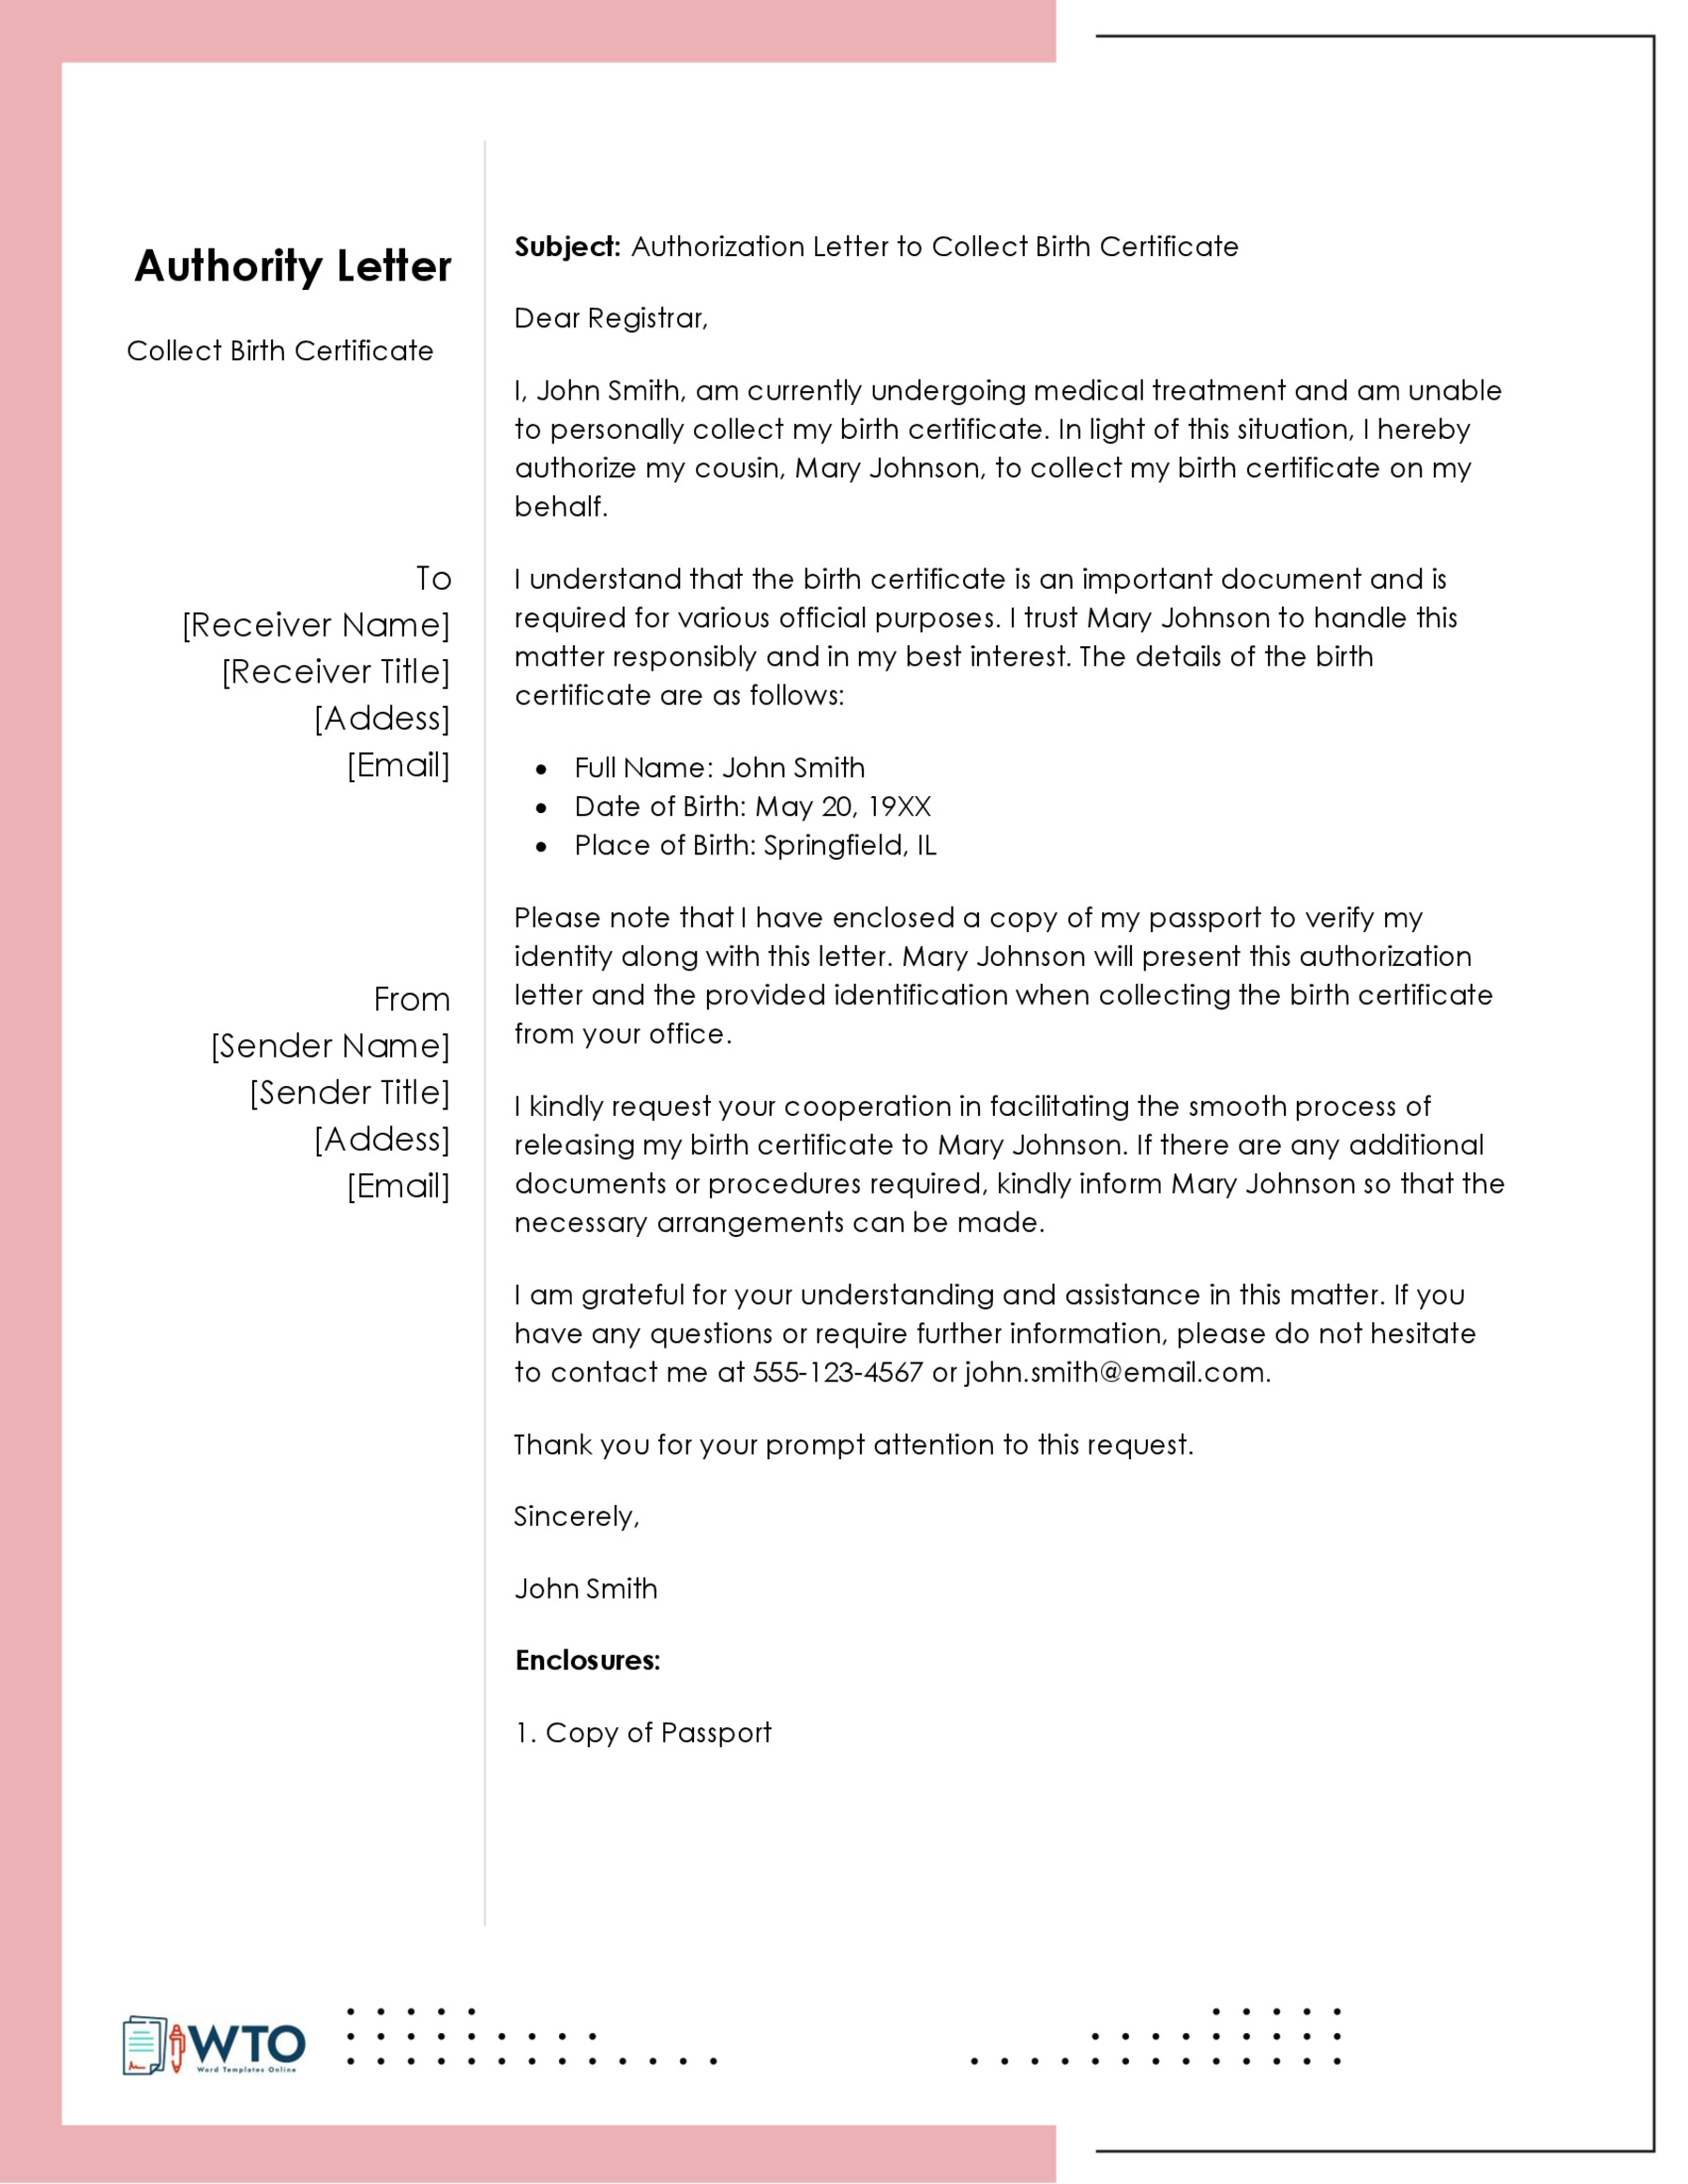 Sample Authorization Letter for Claiming Birth Certificate-Ms word Format